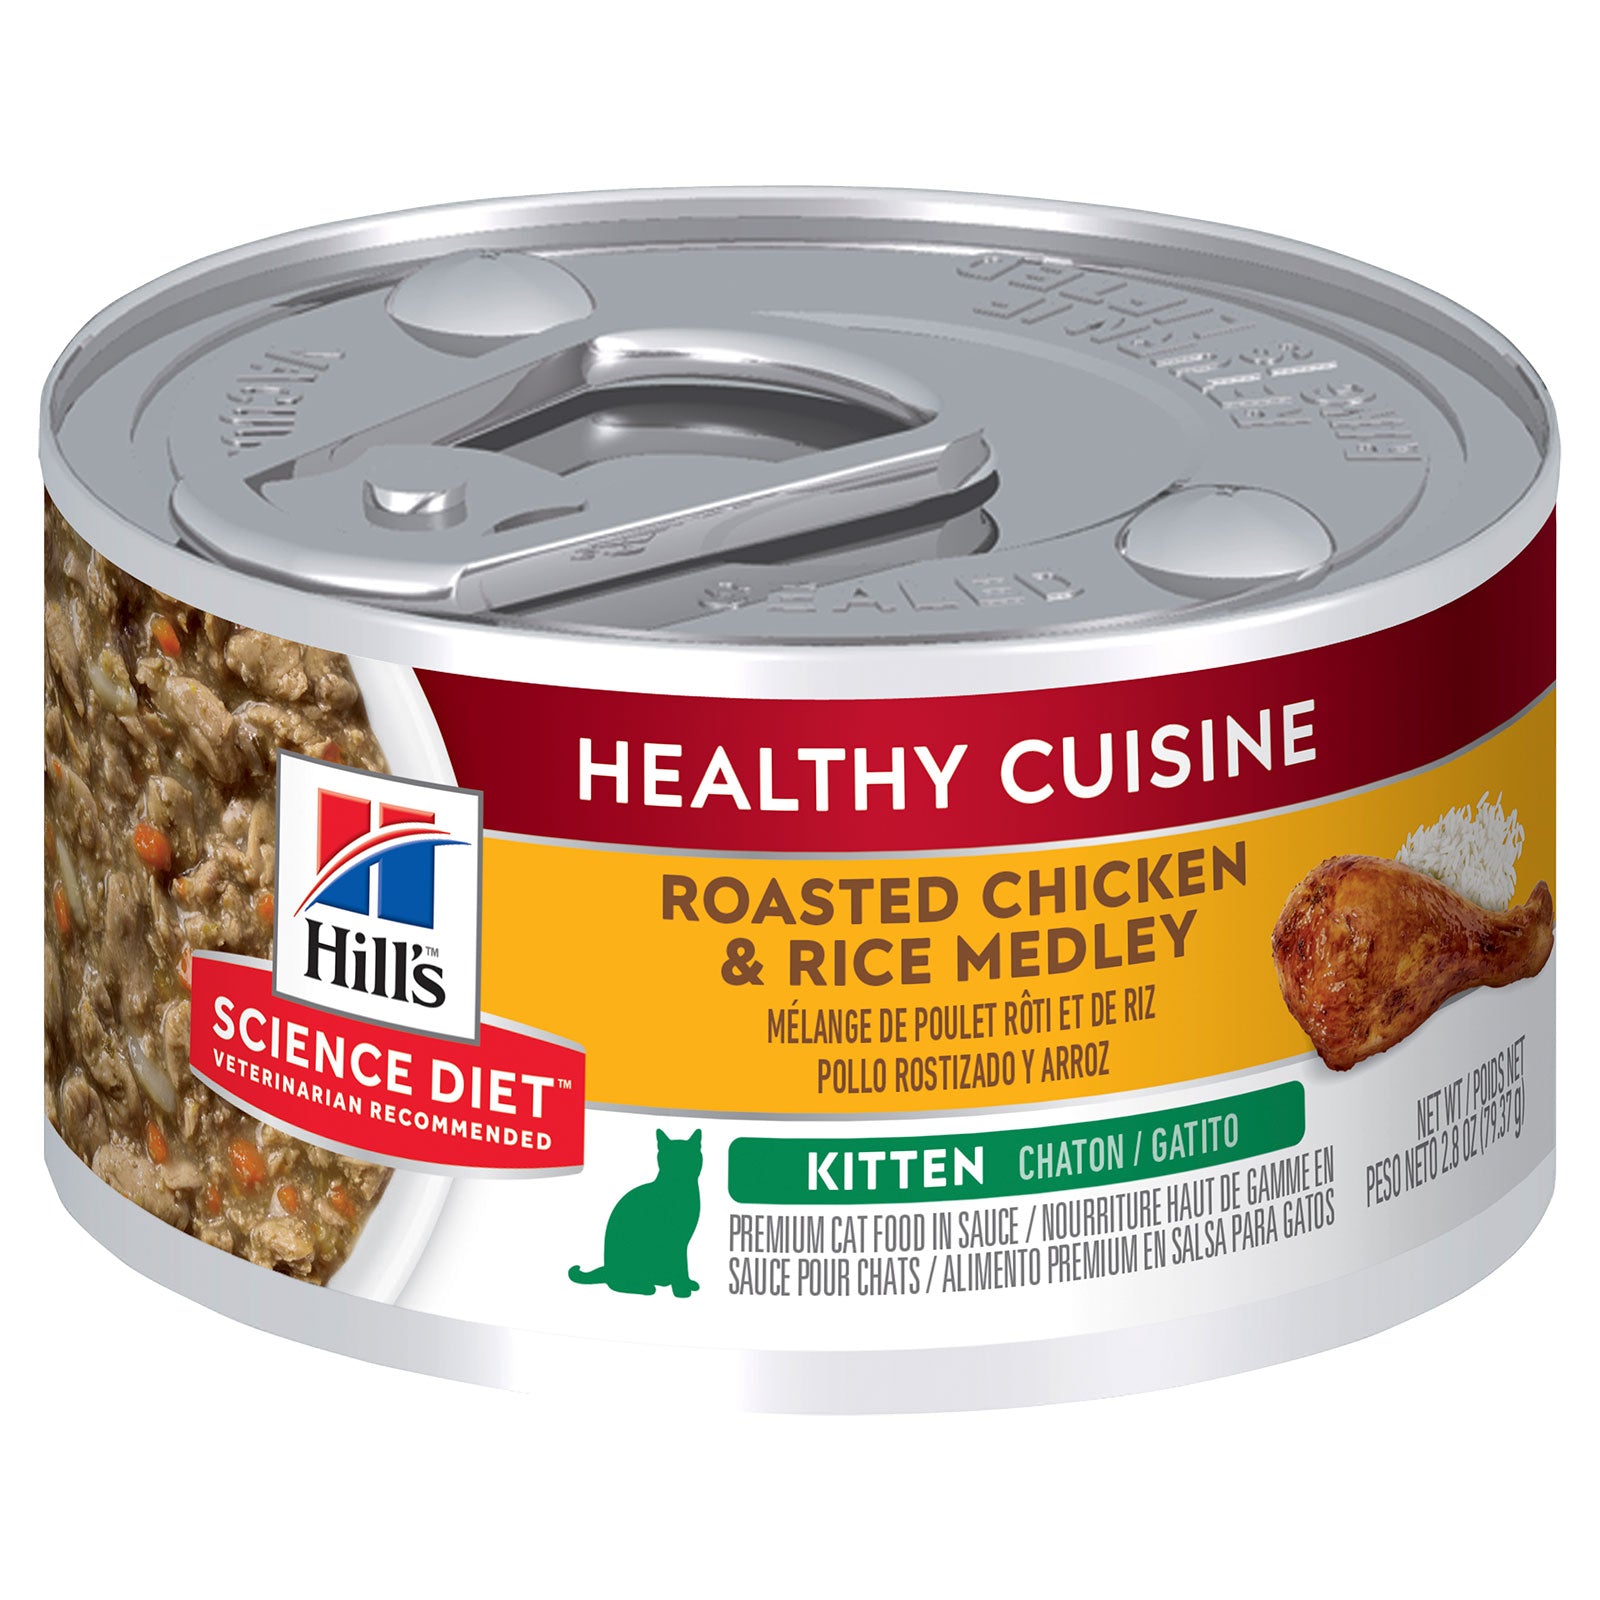 Hill's Science Diet Cat Food Can Kitten Healthy Cuisine Chicken & Rice Medley